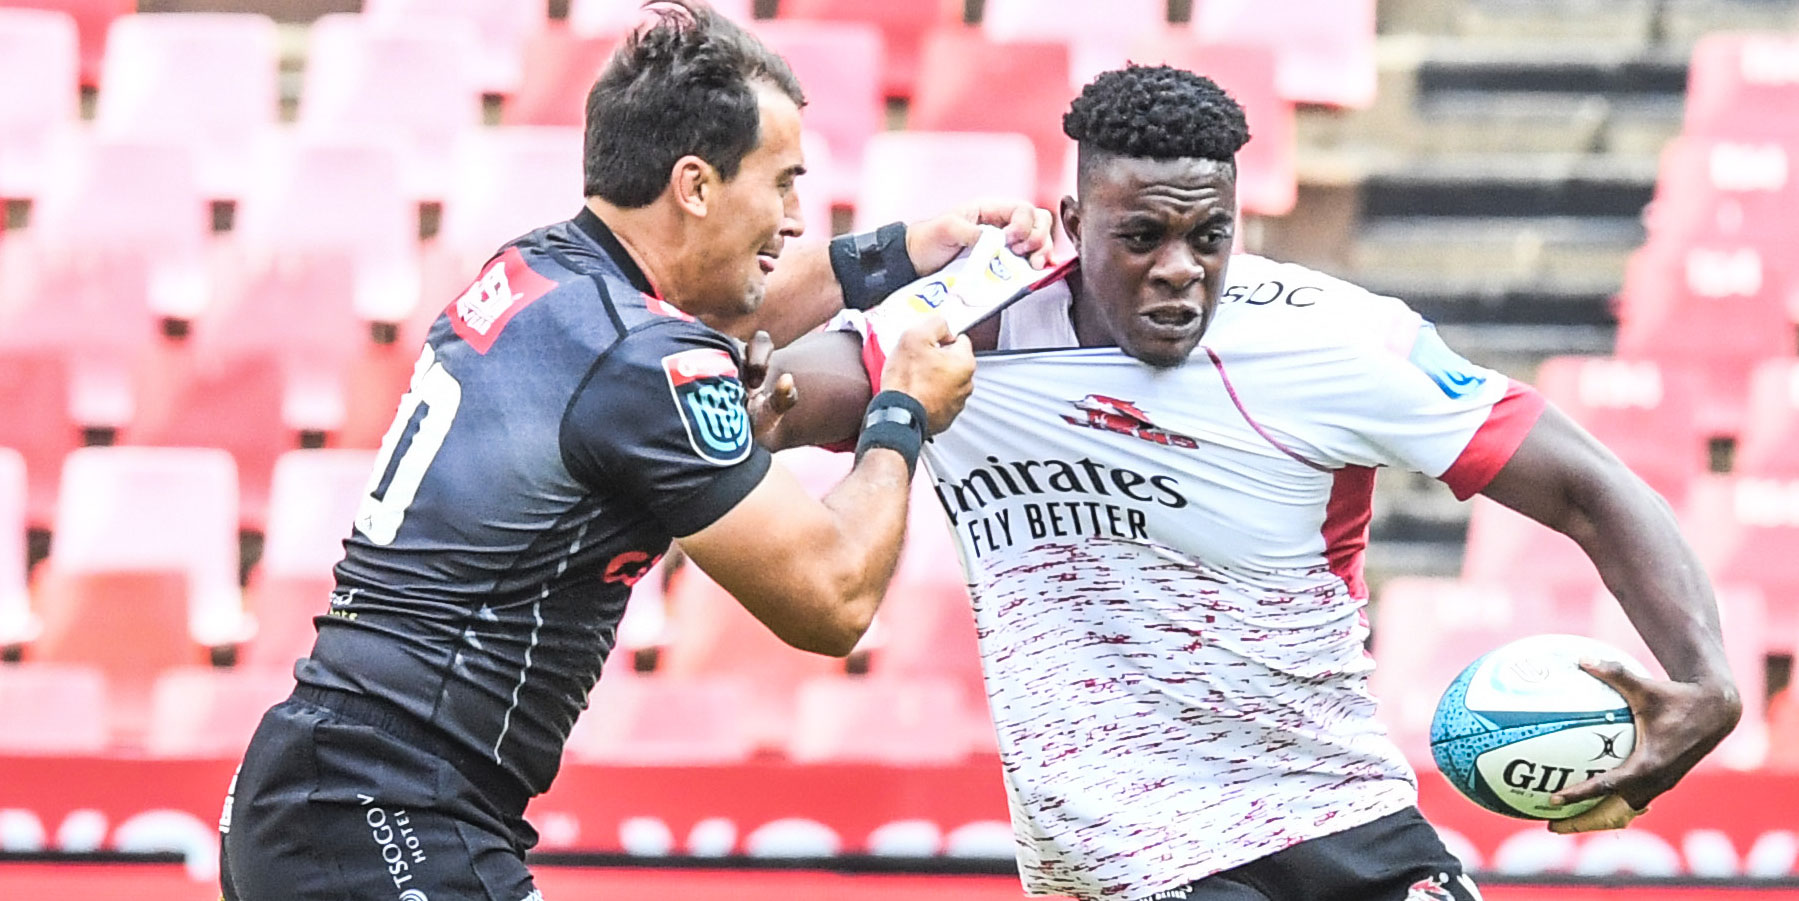 Henco Venter tries to tackle Emmanuel Tshituka the last time the Cell C Sharks and Emirates Lions met.